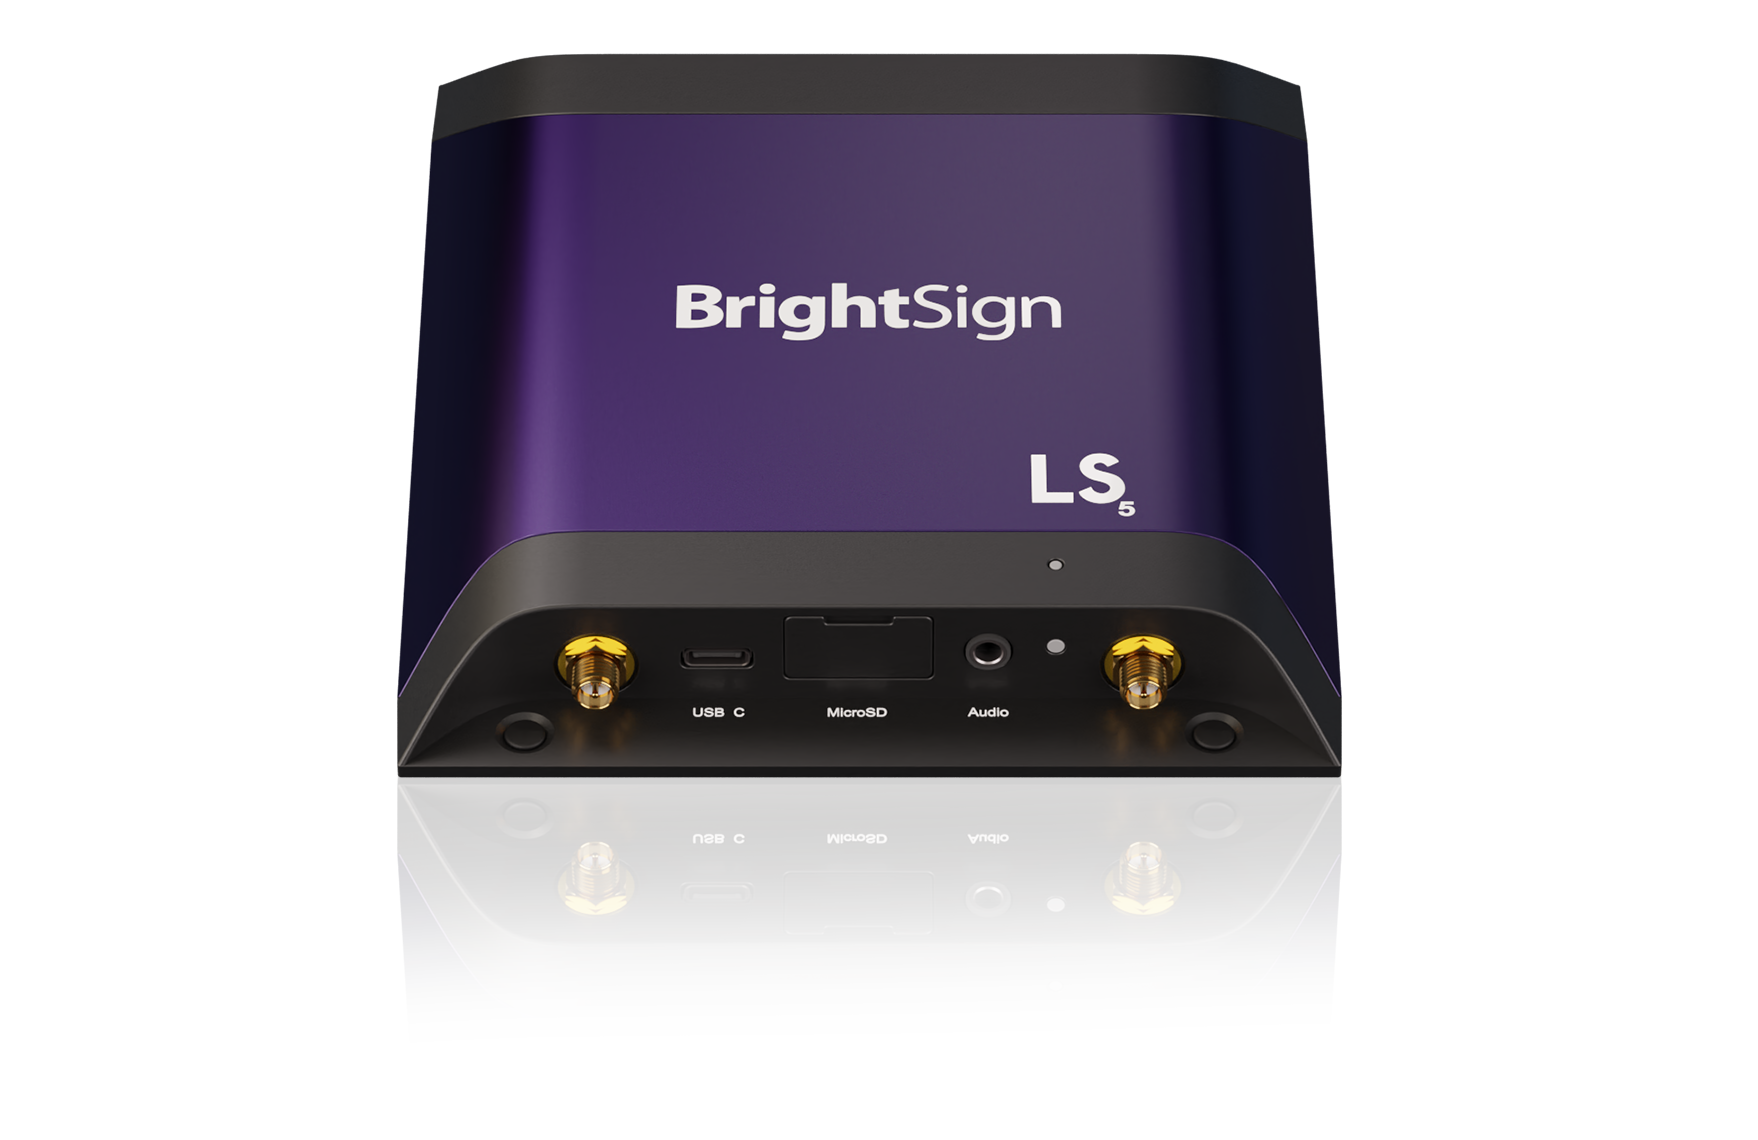 Product image of BrightSign LS5 digital signage players from BrightSign Series 5